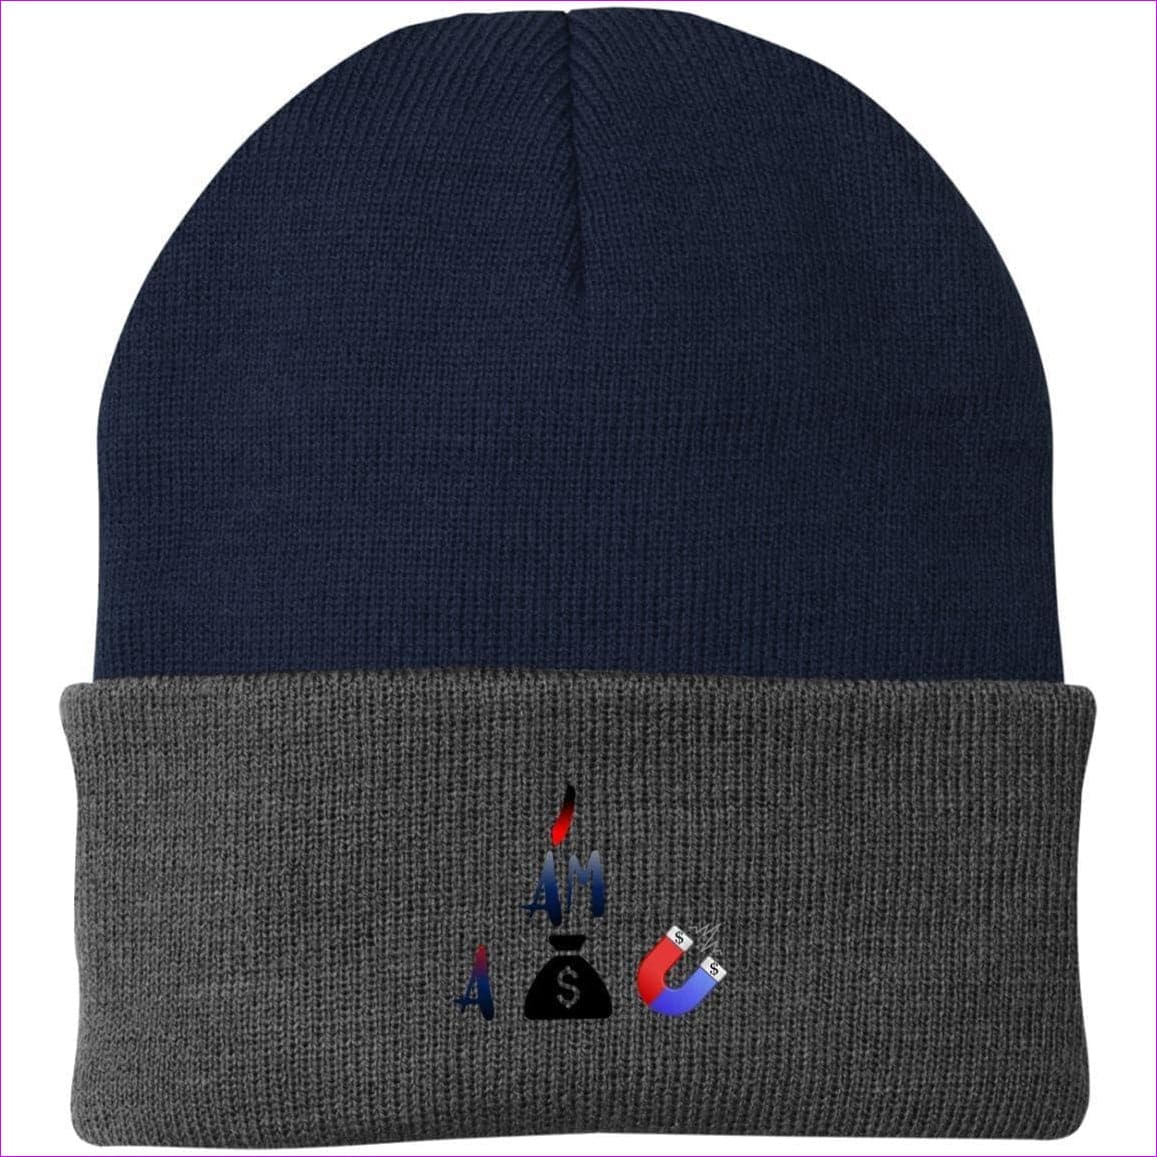 I Am A Money Magnet Knit Cap Navy Athletic Oxford One Size - I Am A Money Magnet Embroidered Caps & Beanies - Hat at TFC&H Co.